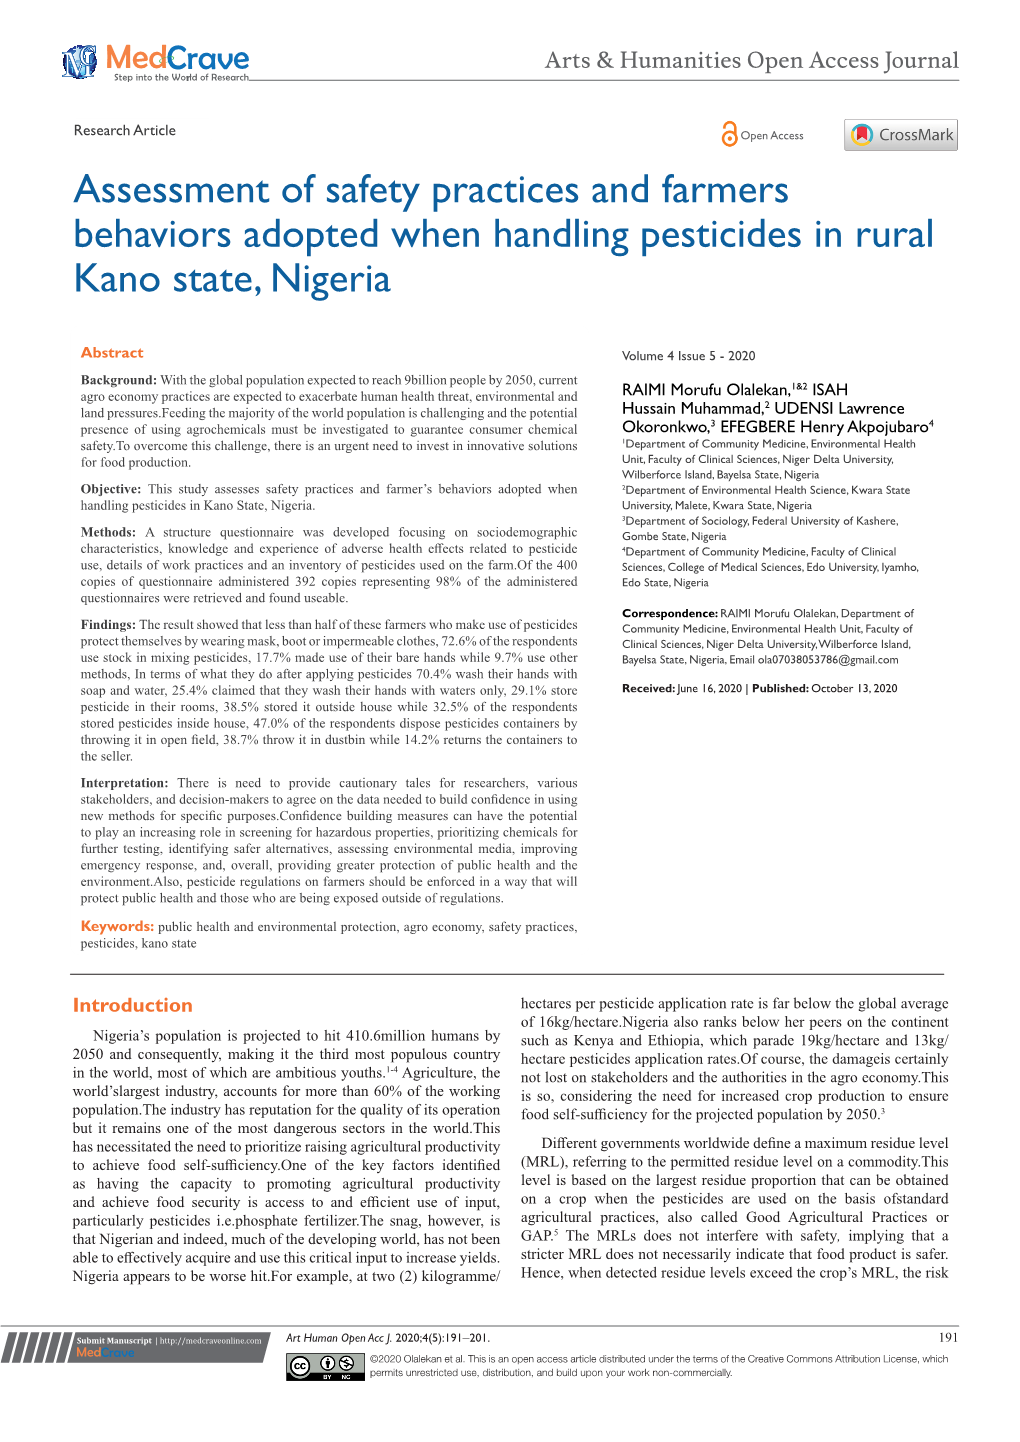 Assessment of Safety Practices and Farmers Behaviors Adopted When Handling Pesticides in Rural Kano State, Nigeria